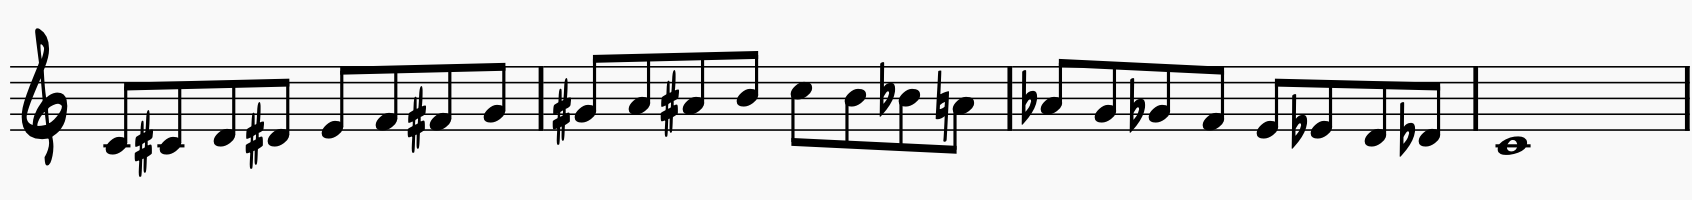 C Chromatic Scale with Sharps ascending and Flats Descending